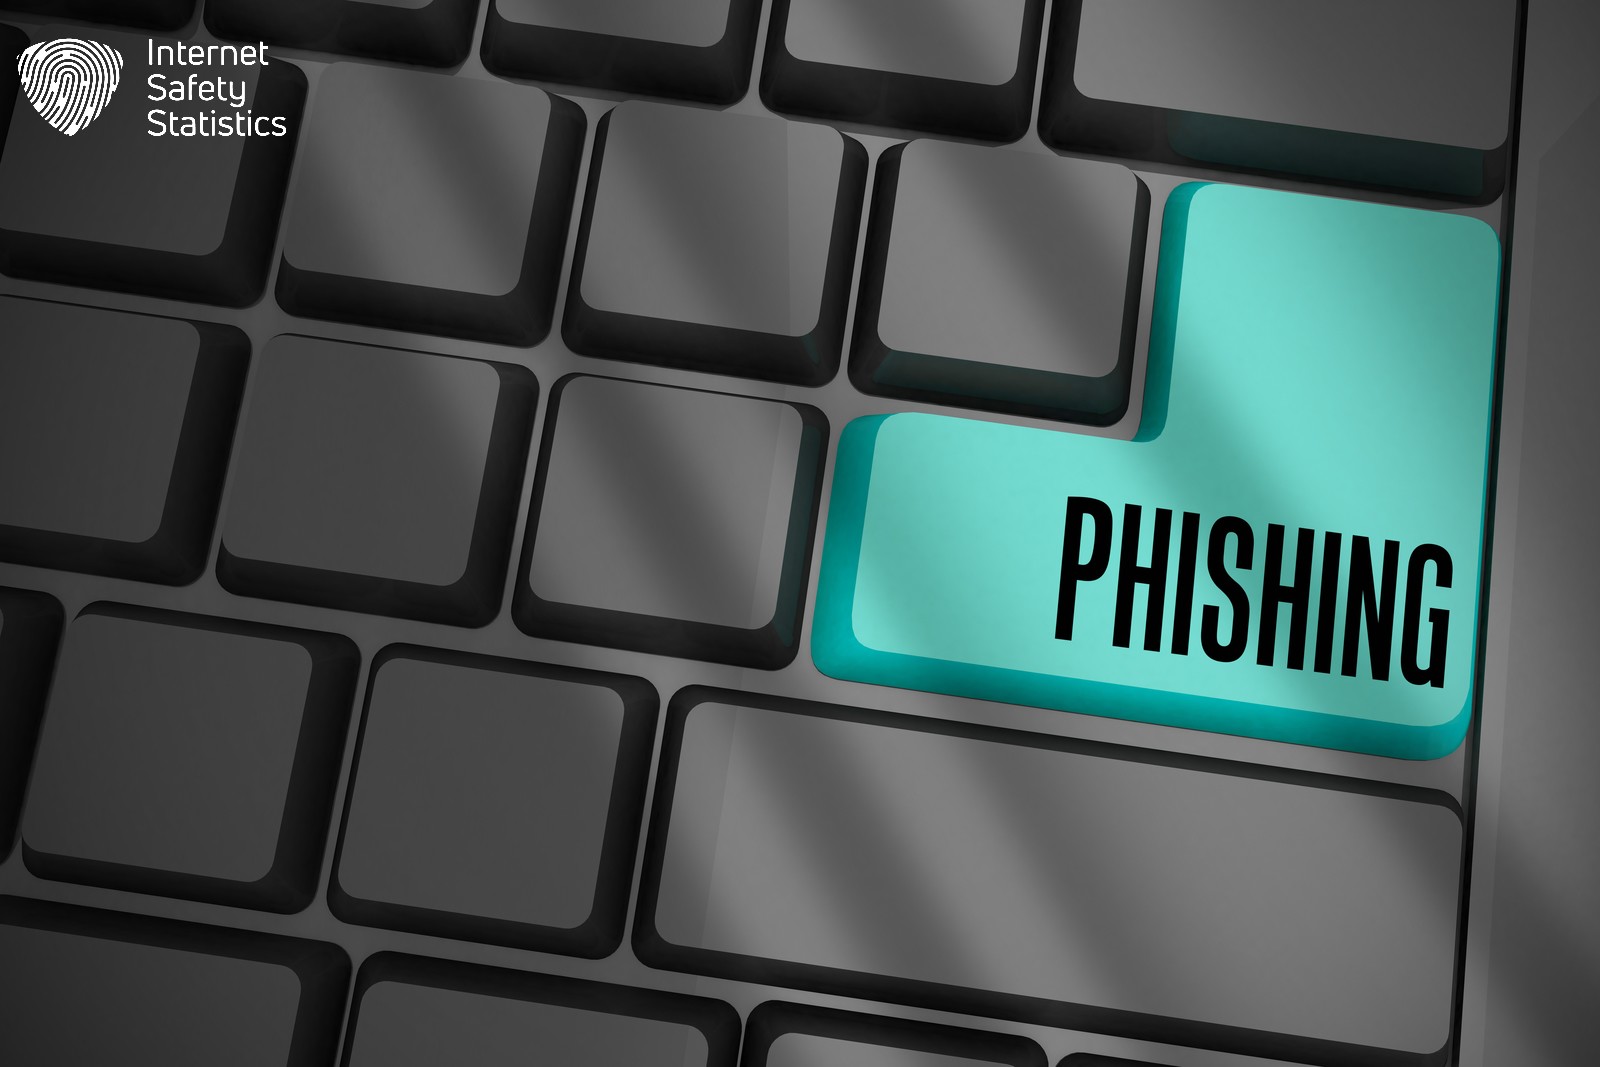 Spectrum Phishing Emails - A phishing email is a scam cyber attackers use to trick the recipients into disclosing sensitive information.